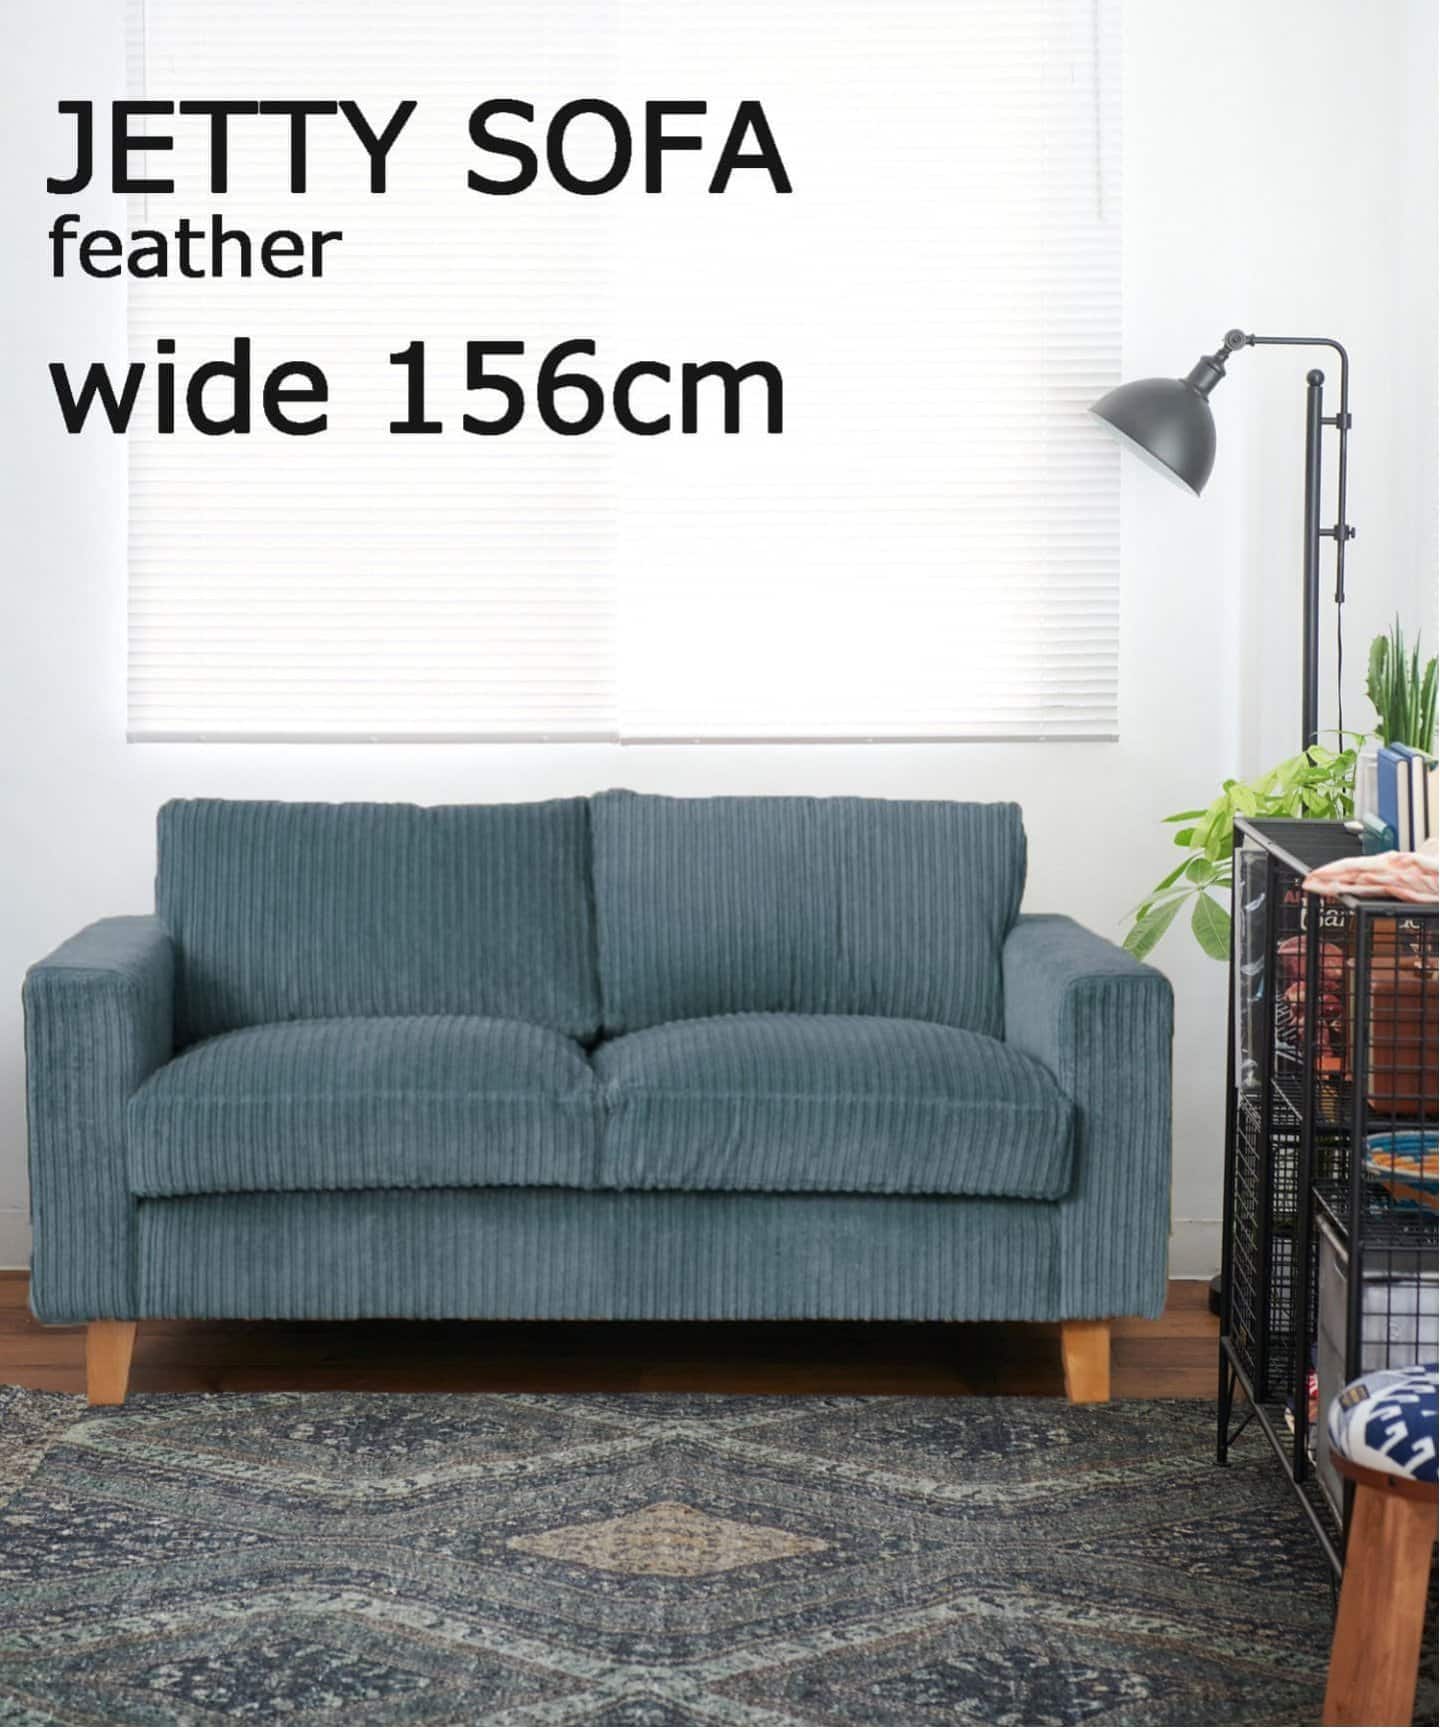 ORDER》JETTY feather SOFA 2P W156 AC-07 BL ジェティー フェザー 